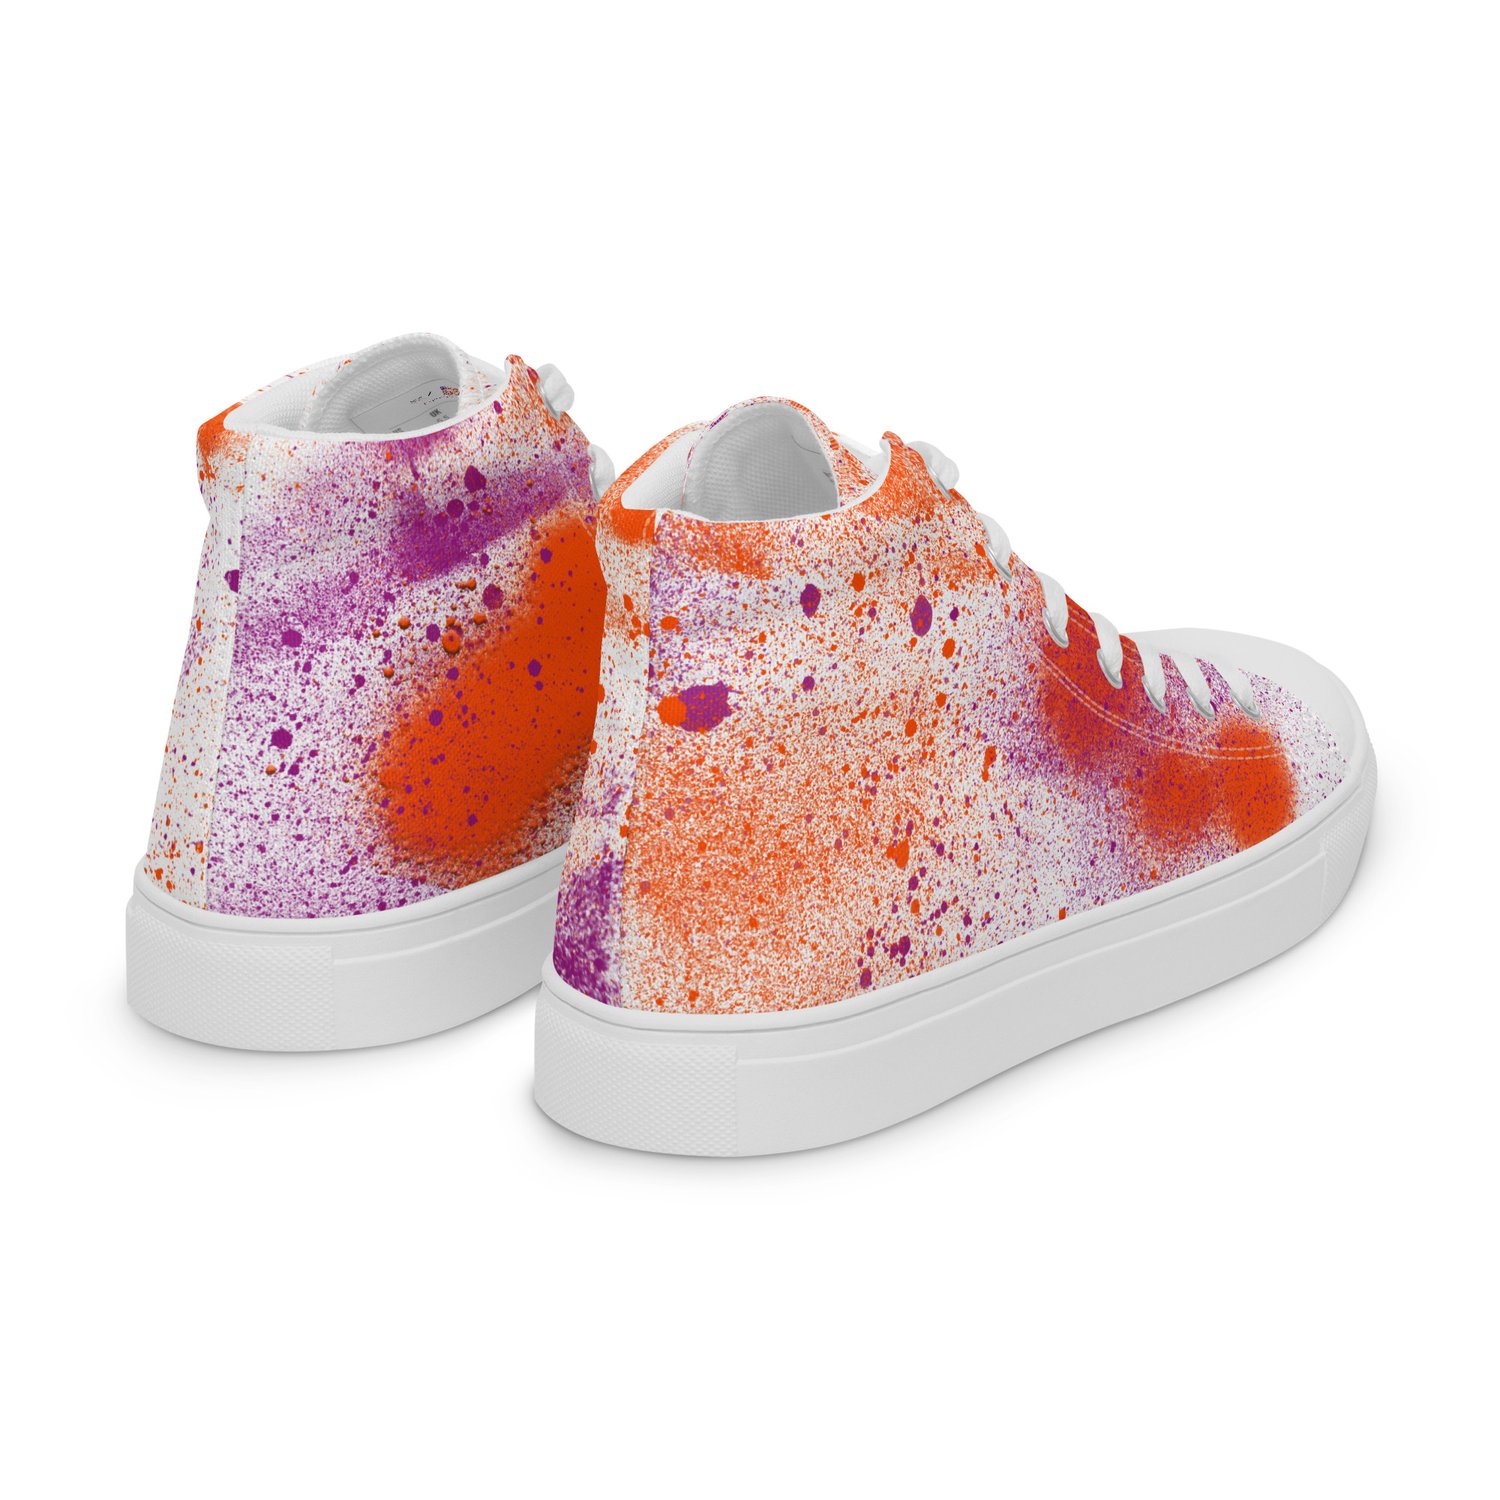 Express Yourself Through Fashion - Canvas Shoes